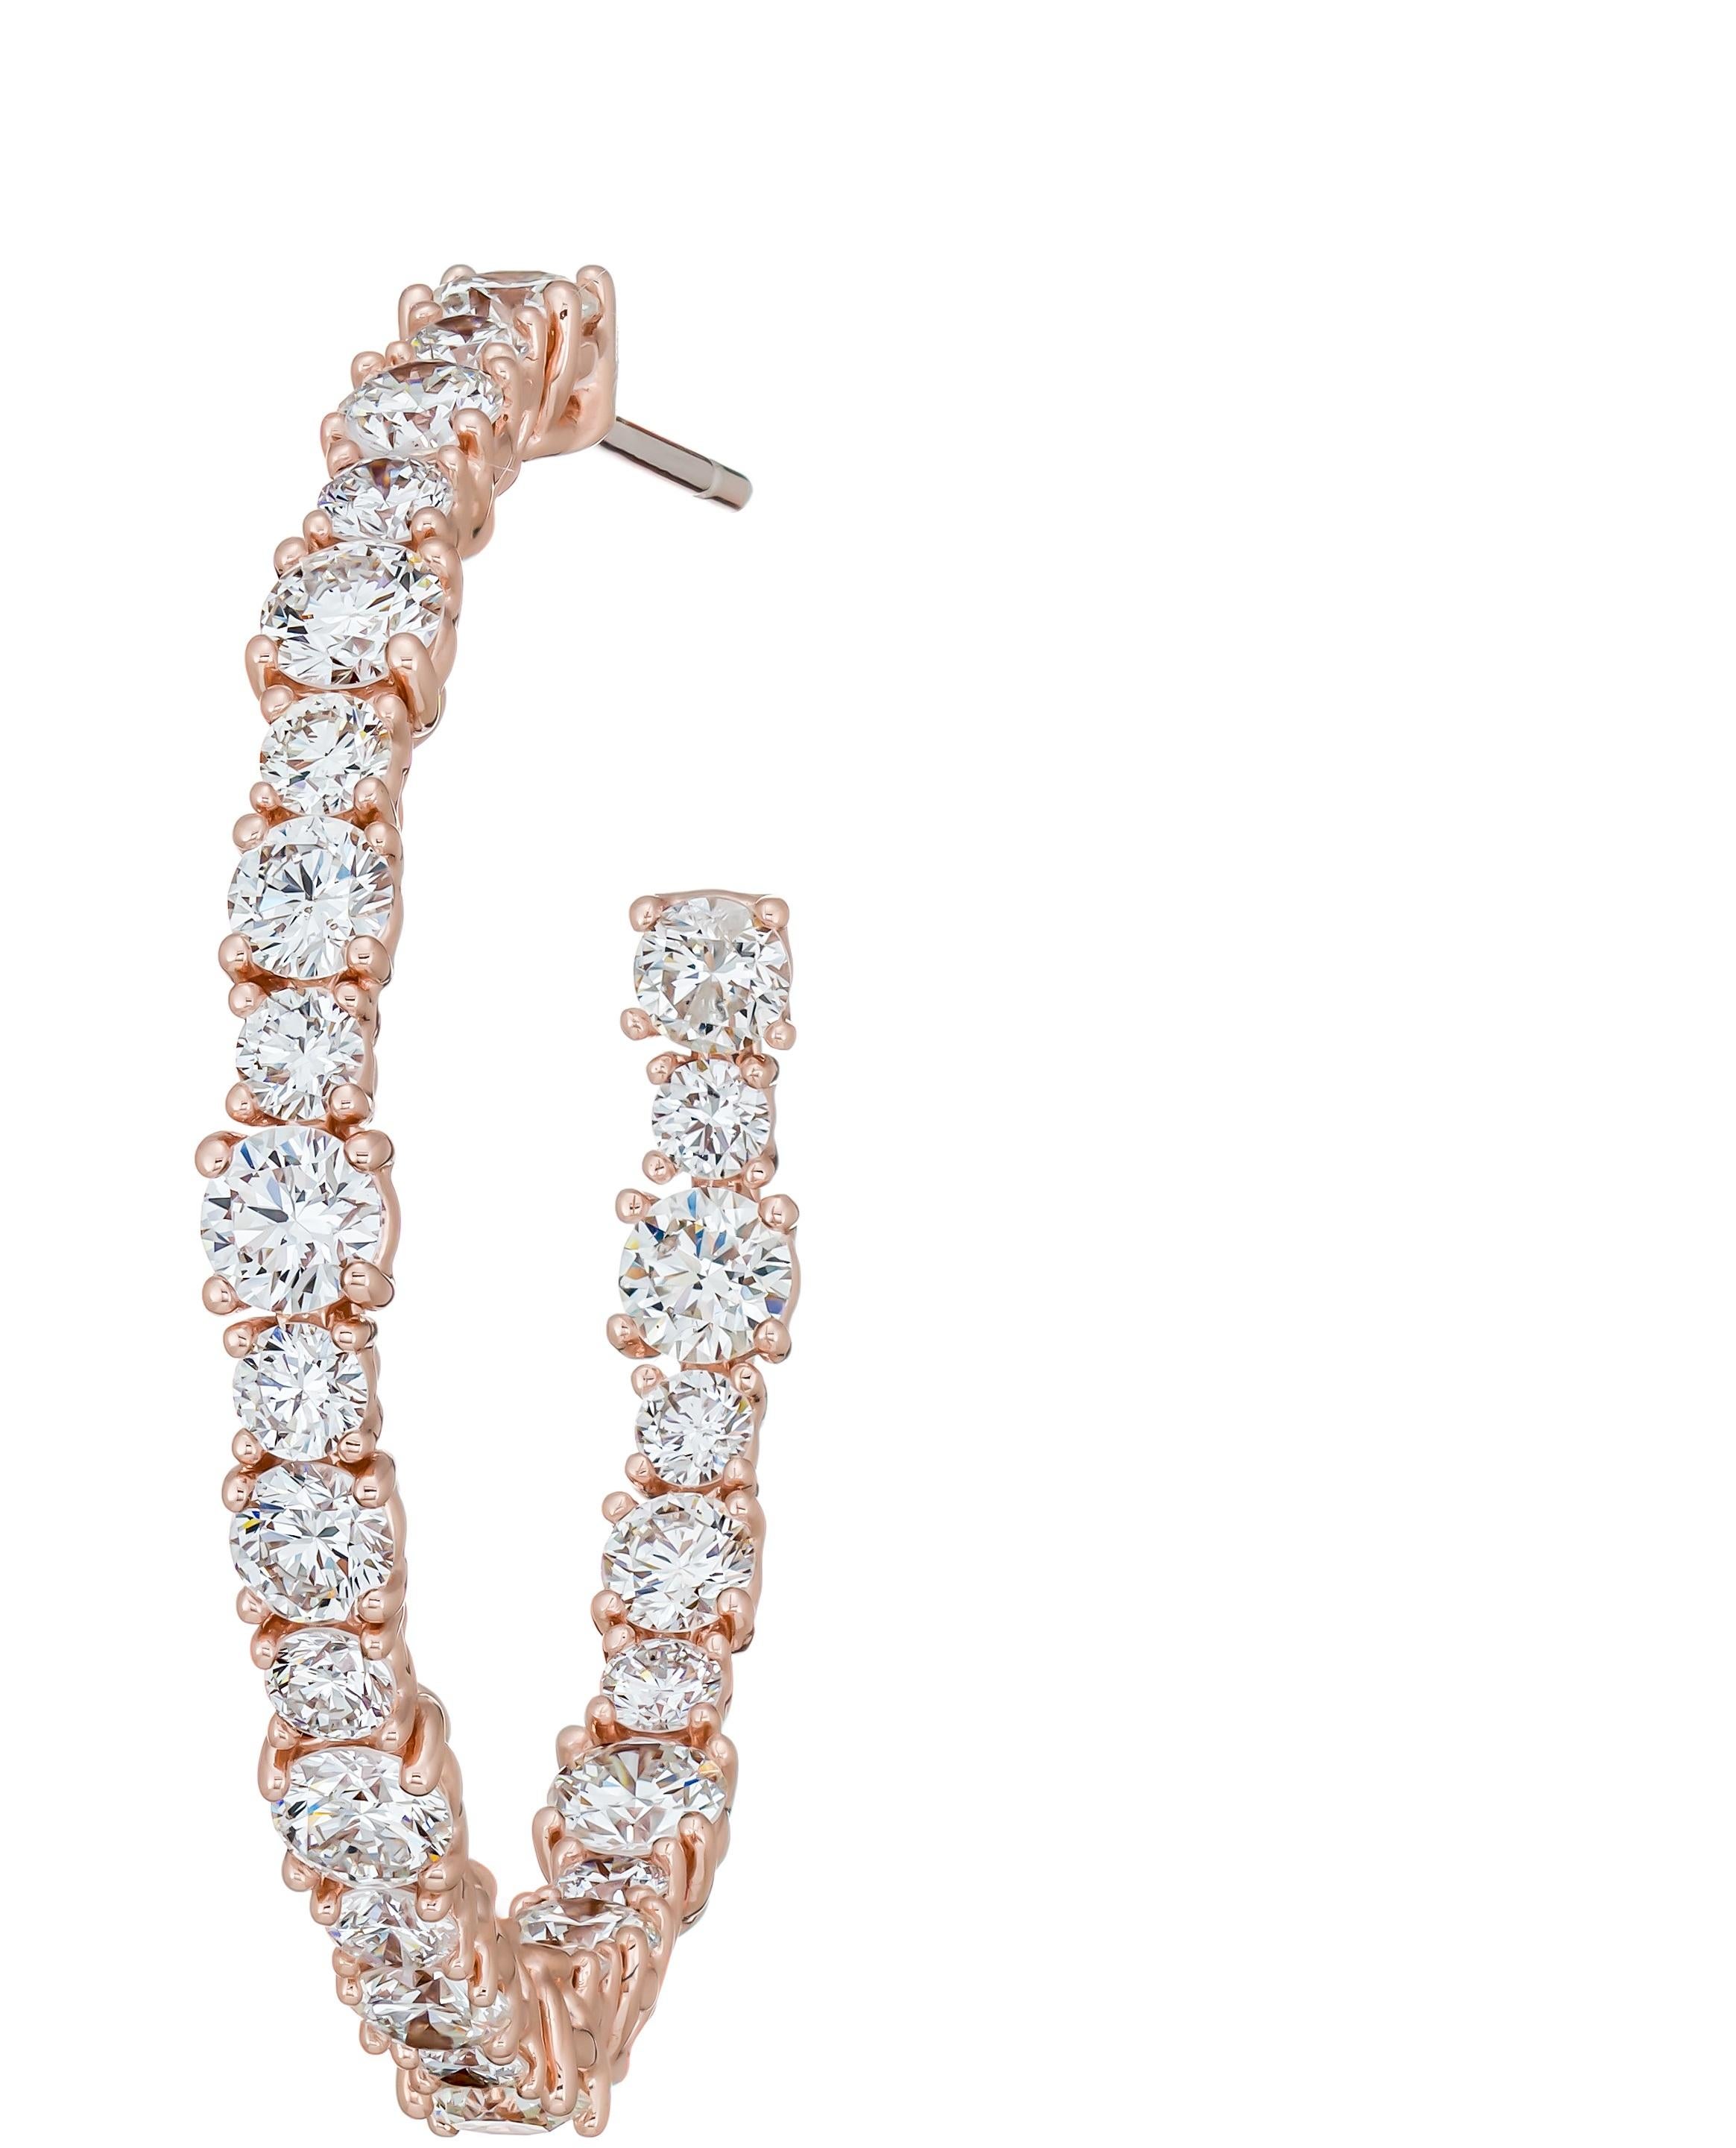 AS29
18k pink gold round diamond small hoop earrings

Diamonds will never be out of style! Crafted from 18kt pink gold, these white diamond small hoop earrings from AS29 exude nothing more than timeless elegance. Diamonds are a girl's best friend,